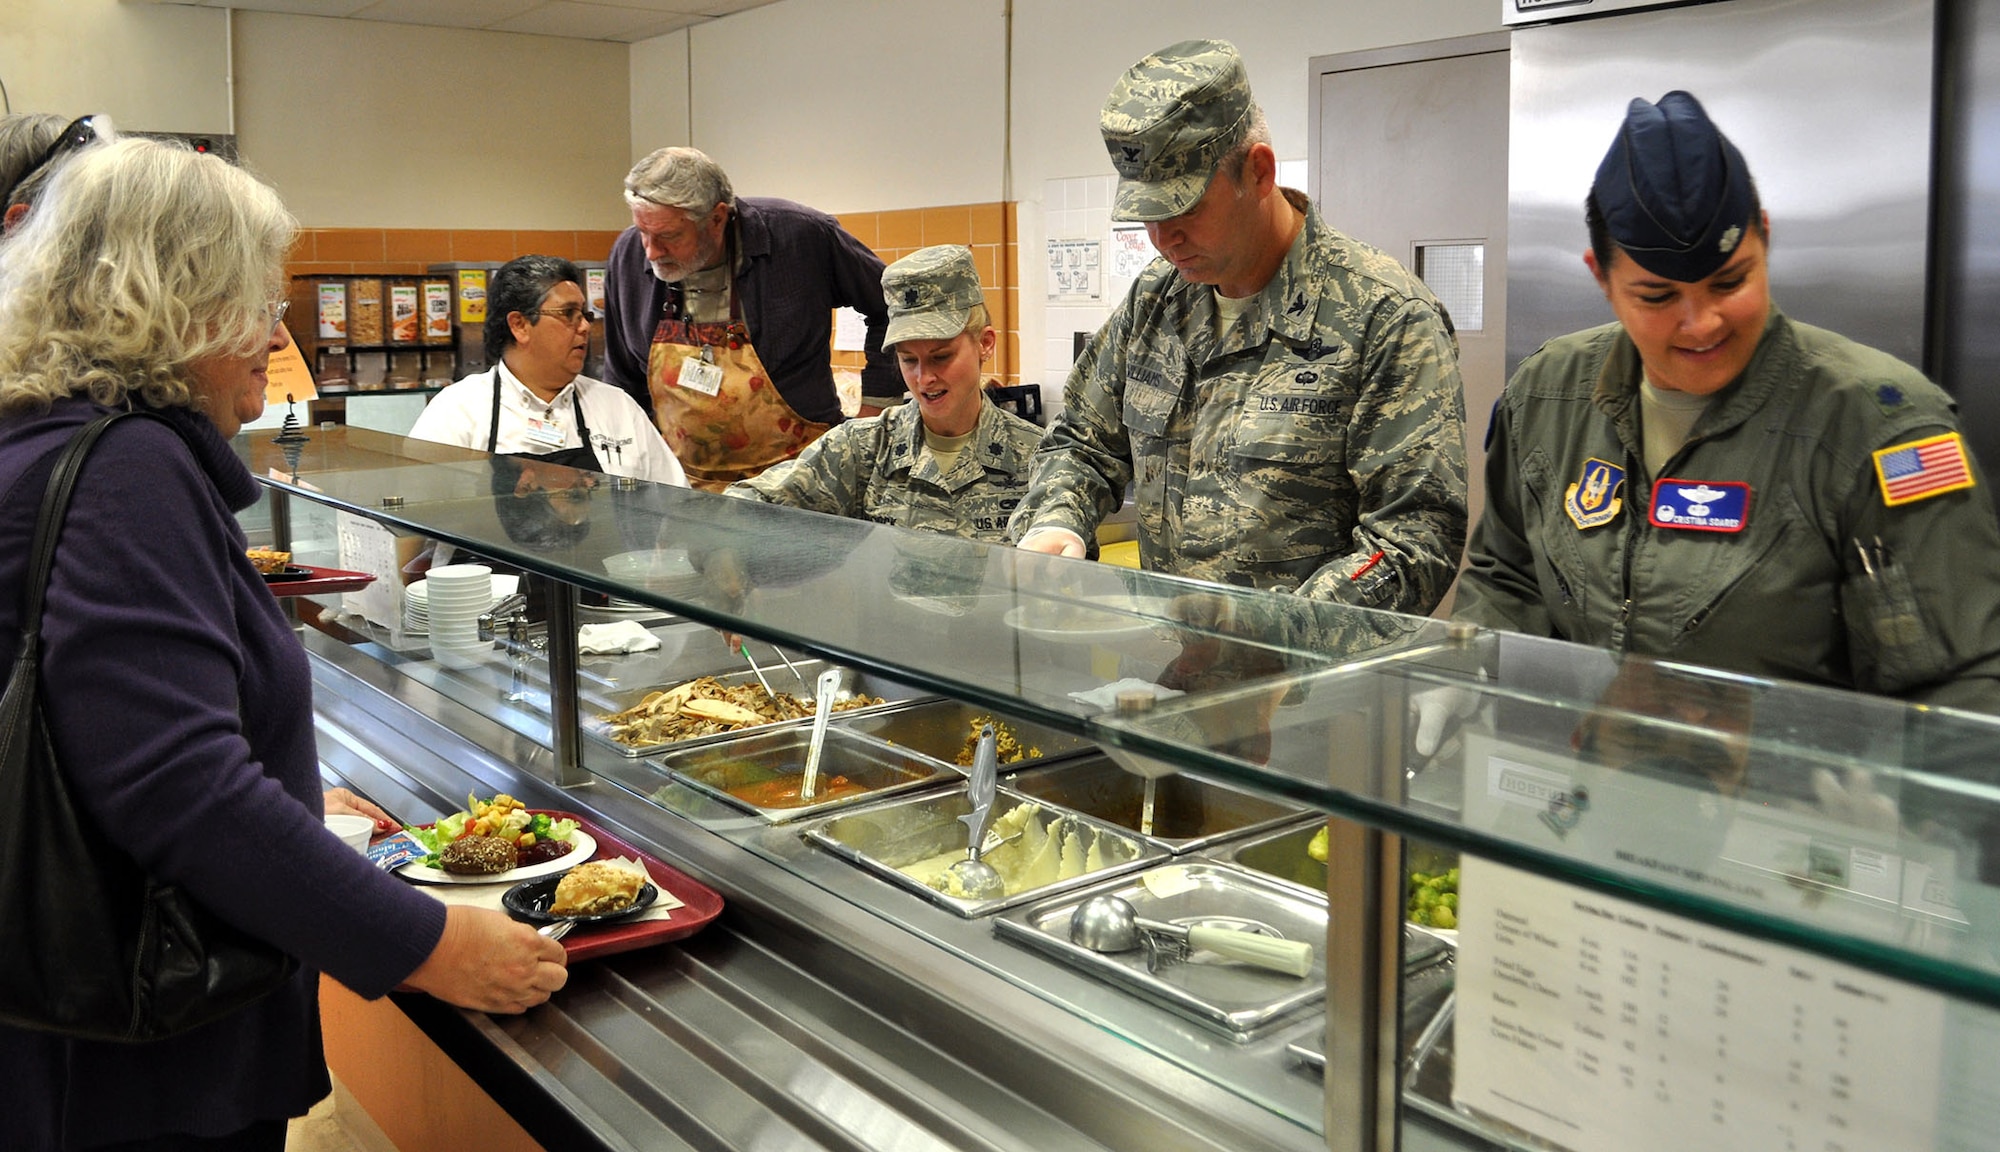 TRAVIS AIR FORCE BASE, Calif. -- Volunteers from the 349th Air Mobility Wing serve up the Thanksgiving meal at the Yountville Veterans Home during their yearly trek to spend the holiday with our veterans. From the left: Lt. Col. Arianne Babcock, 749th Aircraft Maintenance Squadron, Col. Patrick Williams, 349th AMW vice commander, and Lt. Col. Christina Soares, 79th Air Refueling Squadron commander help fill the plates with turkey and all the trimmings. (U.S. Air Force photo/SMSgt. (ret) Ellen Hatfield)
